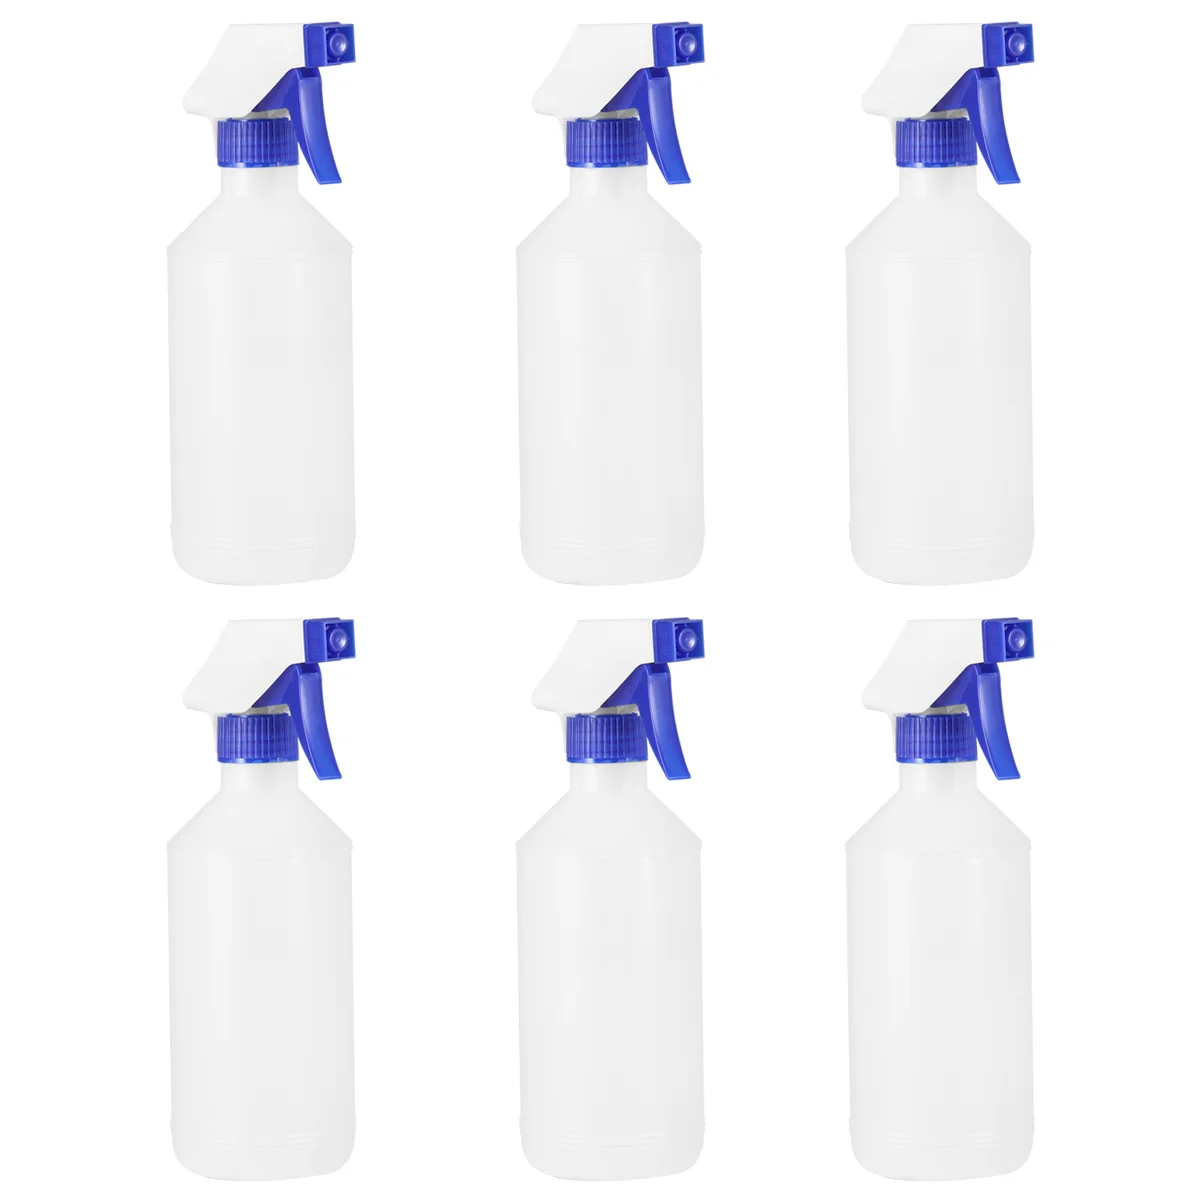 

Spray Bottle Sprayer Bottles Water Mist Hair Cleaning Garden Solutions Fine Pump Gallon Continuous Squirt Empty Containers